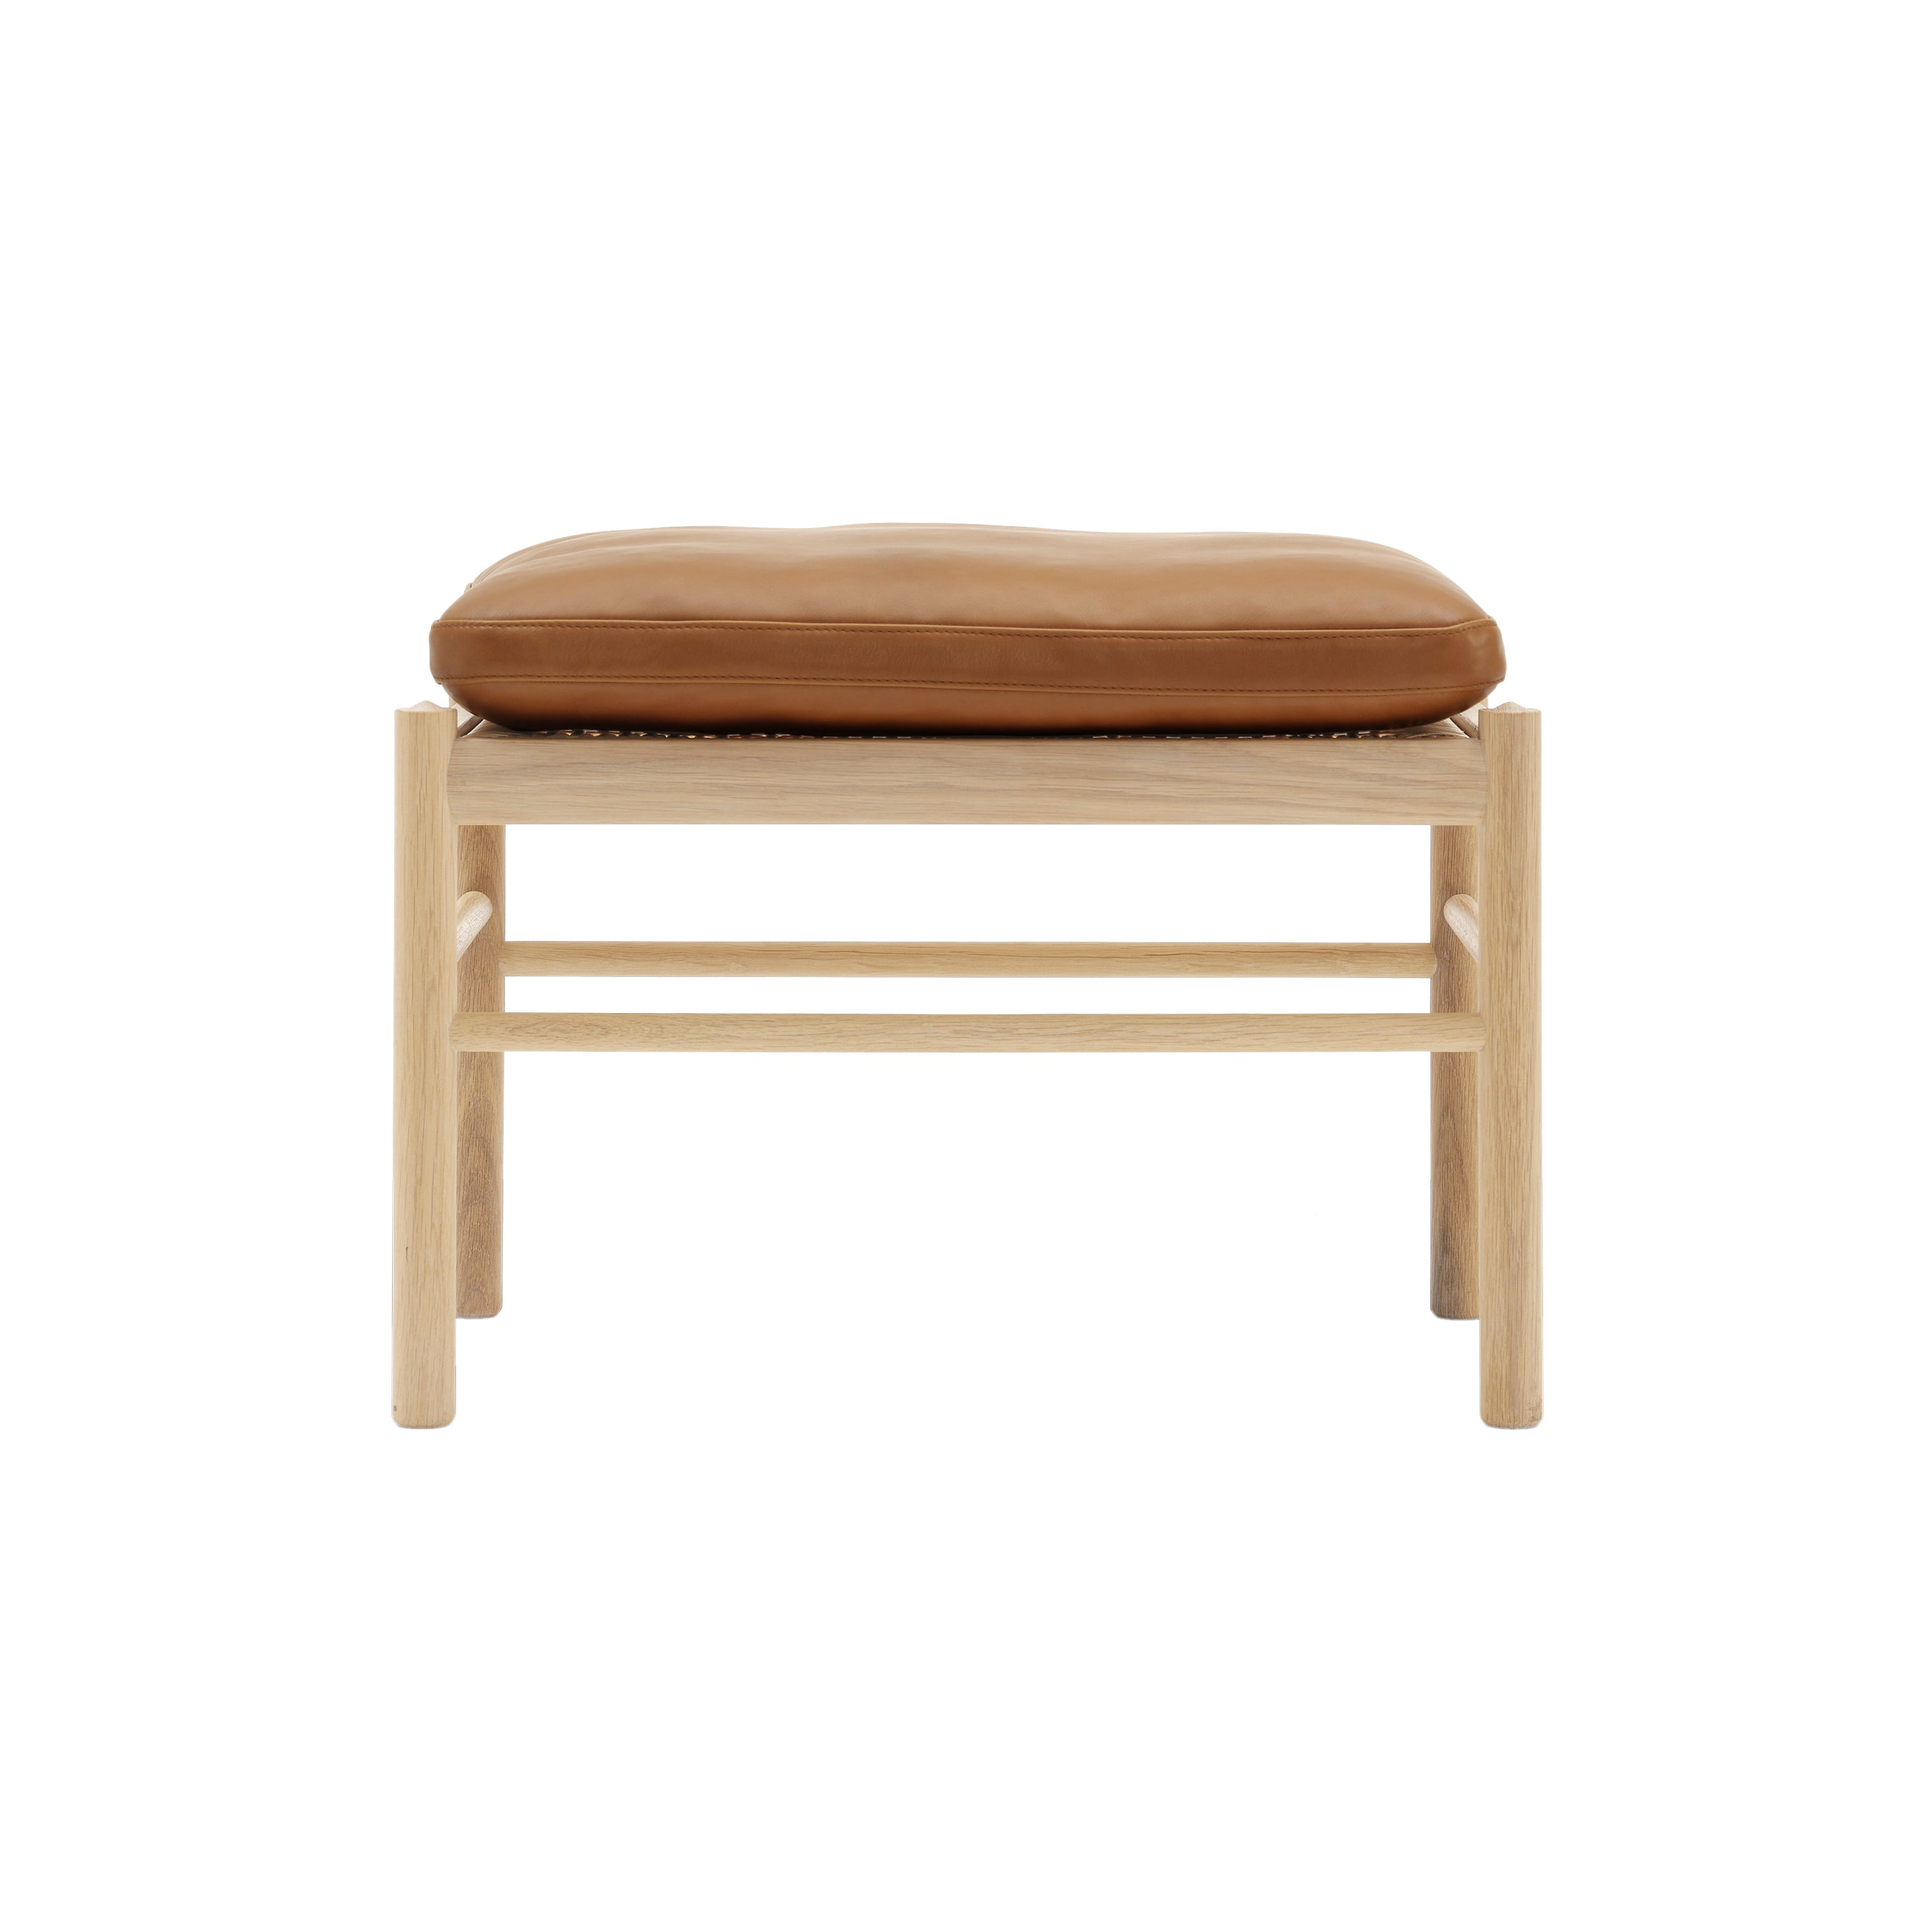 OW149F Colonial Footstool: Soaped Oak